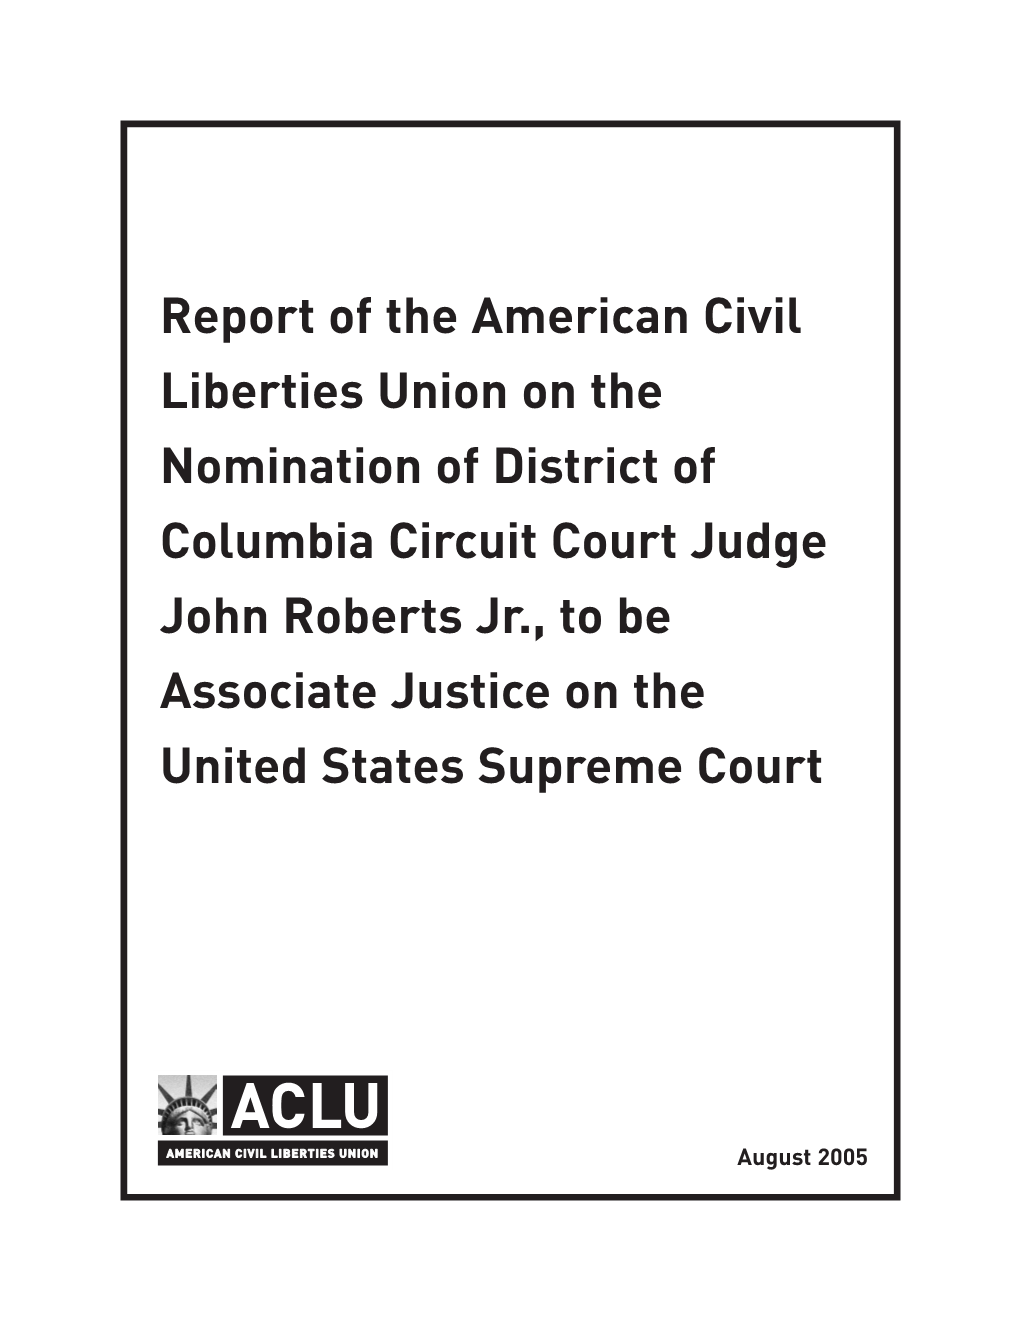 Report of the American Civil Liberties Union on the Nomination of District